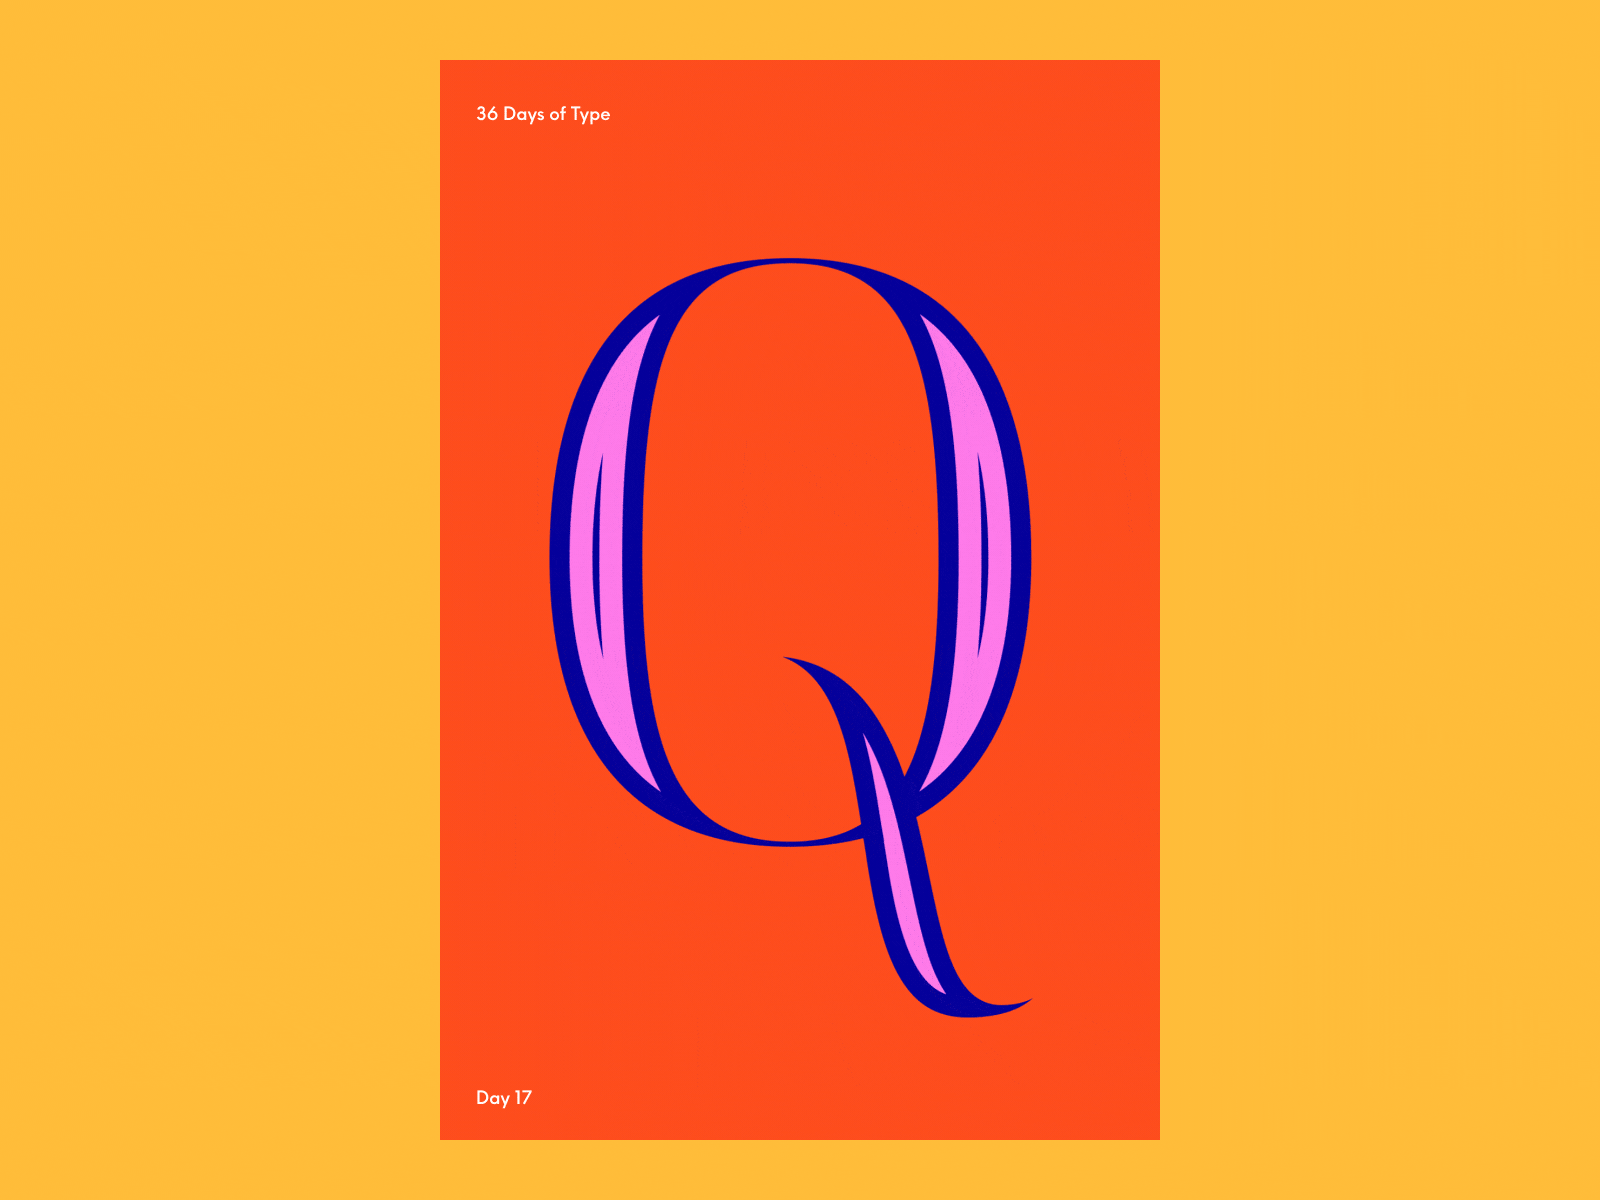 36 Days of Type / Q 36 days of type 36daysoftype 36daysoftype08 36dot ae after effects animated animated type animation animography colors design kinetic kinetic type motion motion design motion graphic motion graphics type typography